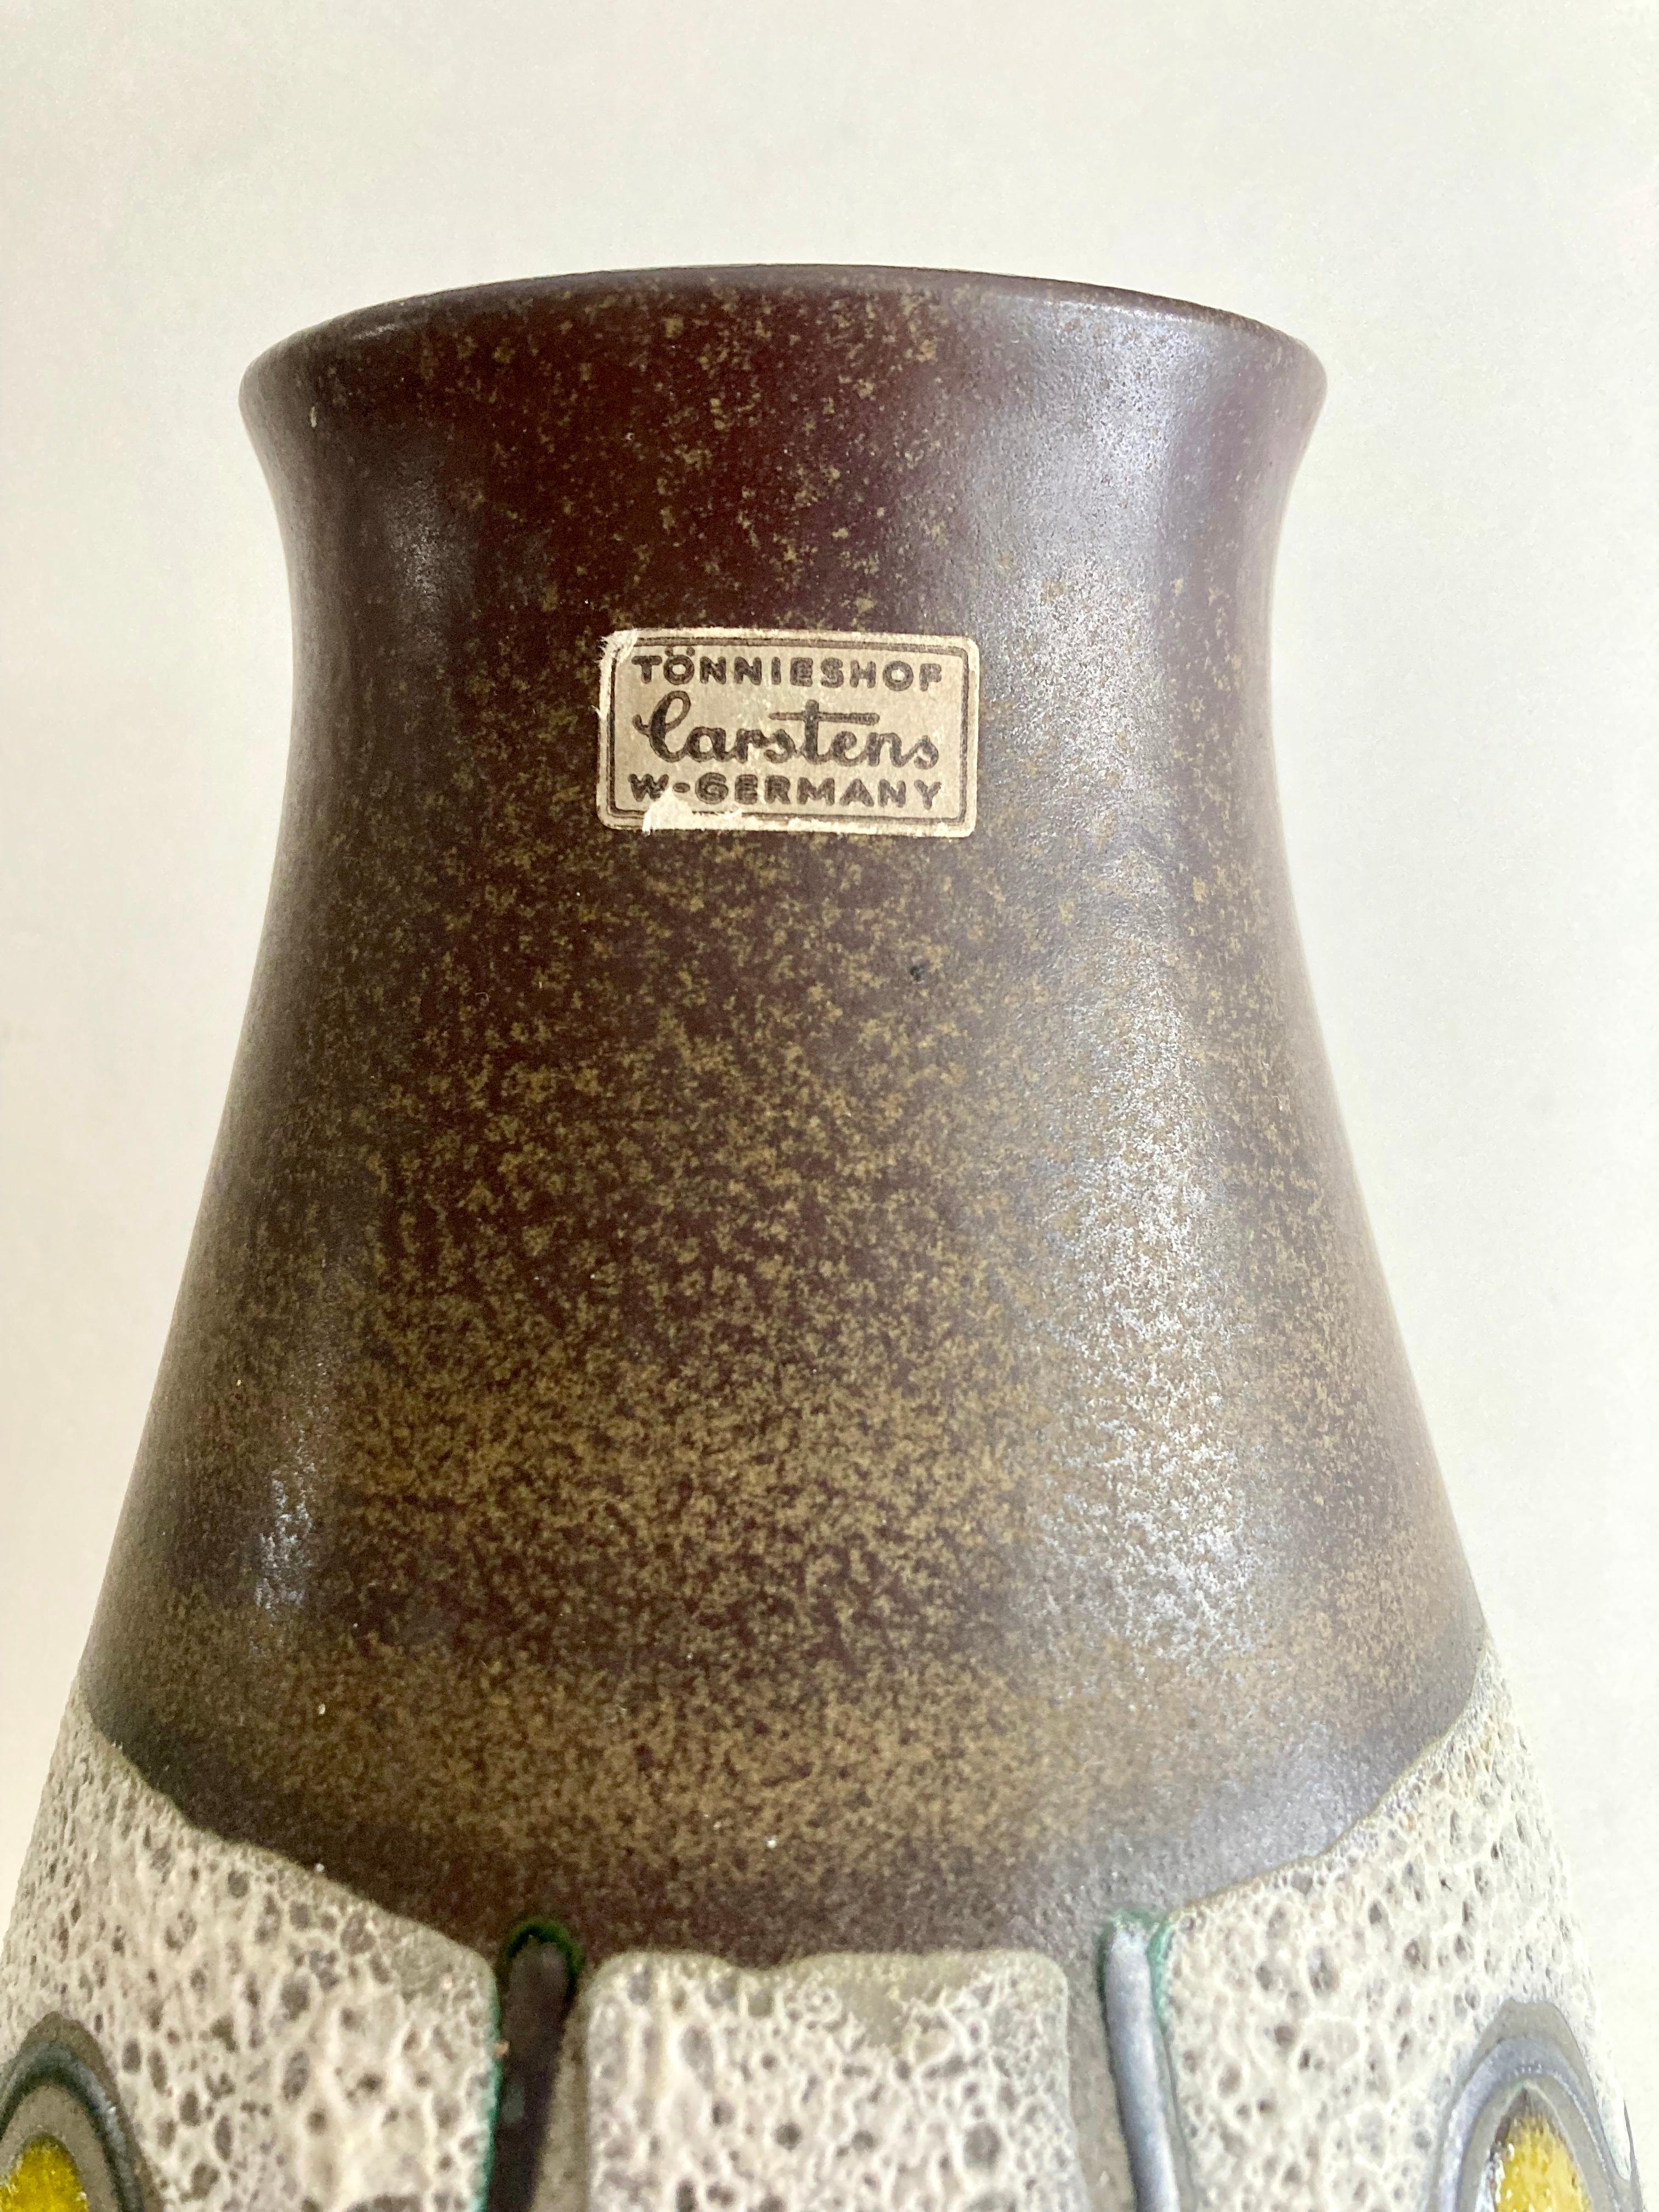 This authentic mid-century modern ceramic vase was made by the West German art pottery producer Carstens Tönnieshof in the 1960s. As can be seen from the embossed markings on the base, this is model number 1239-35 (see photos). The vase has been